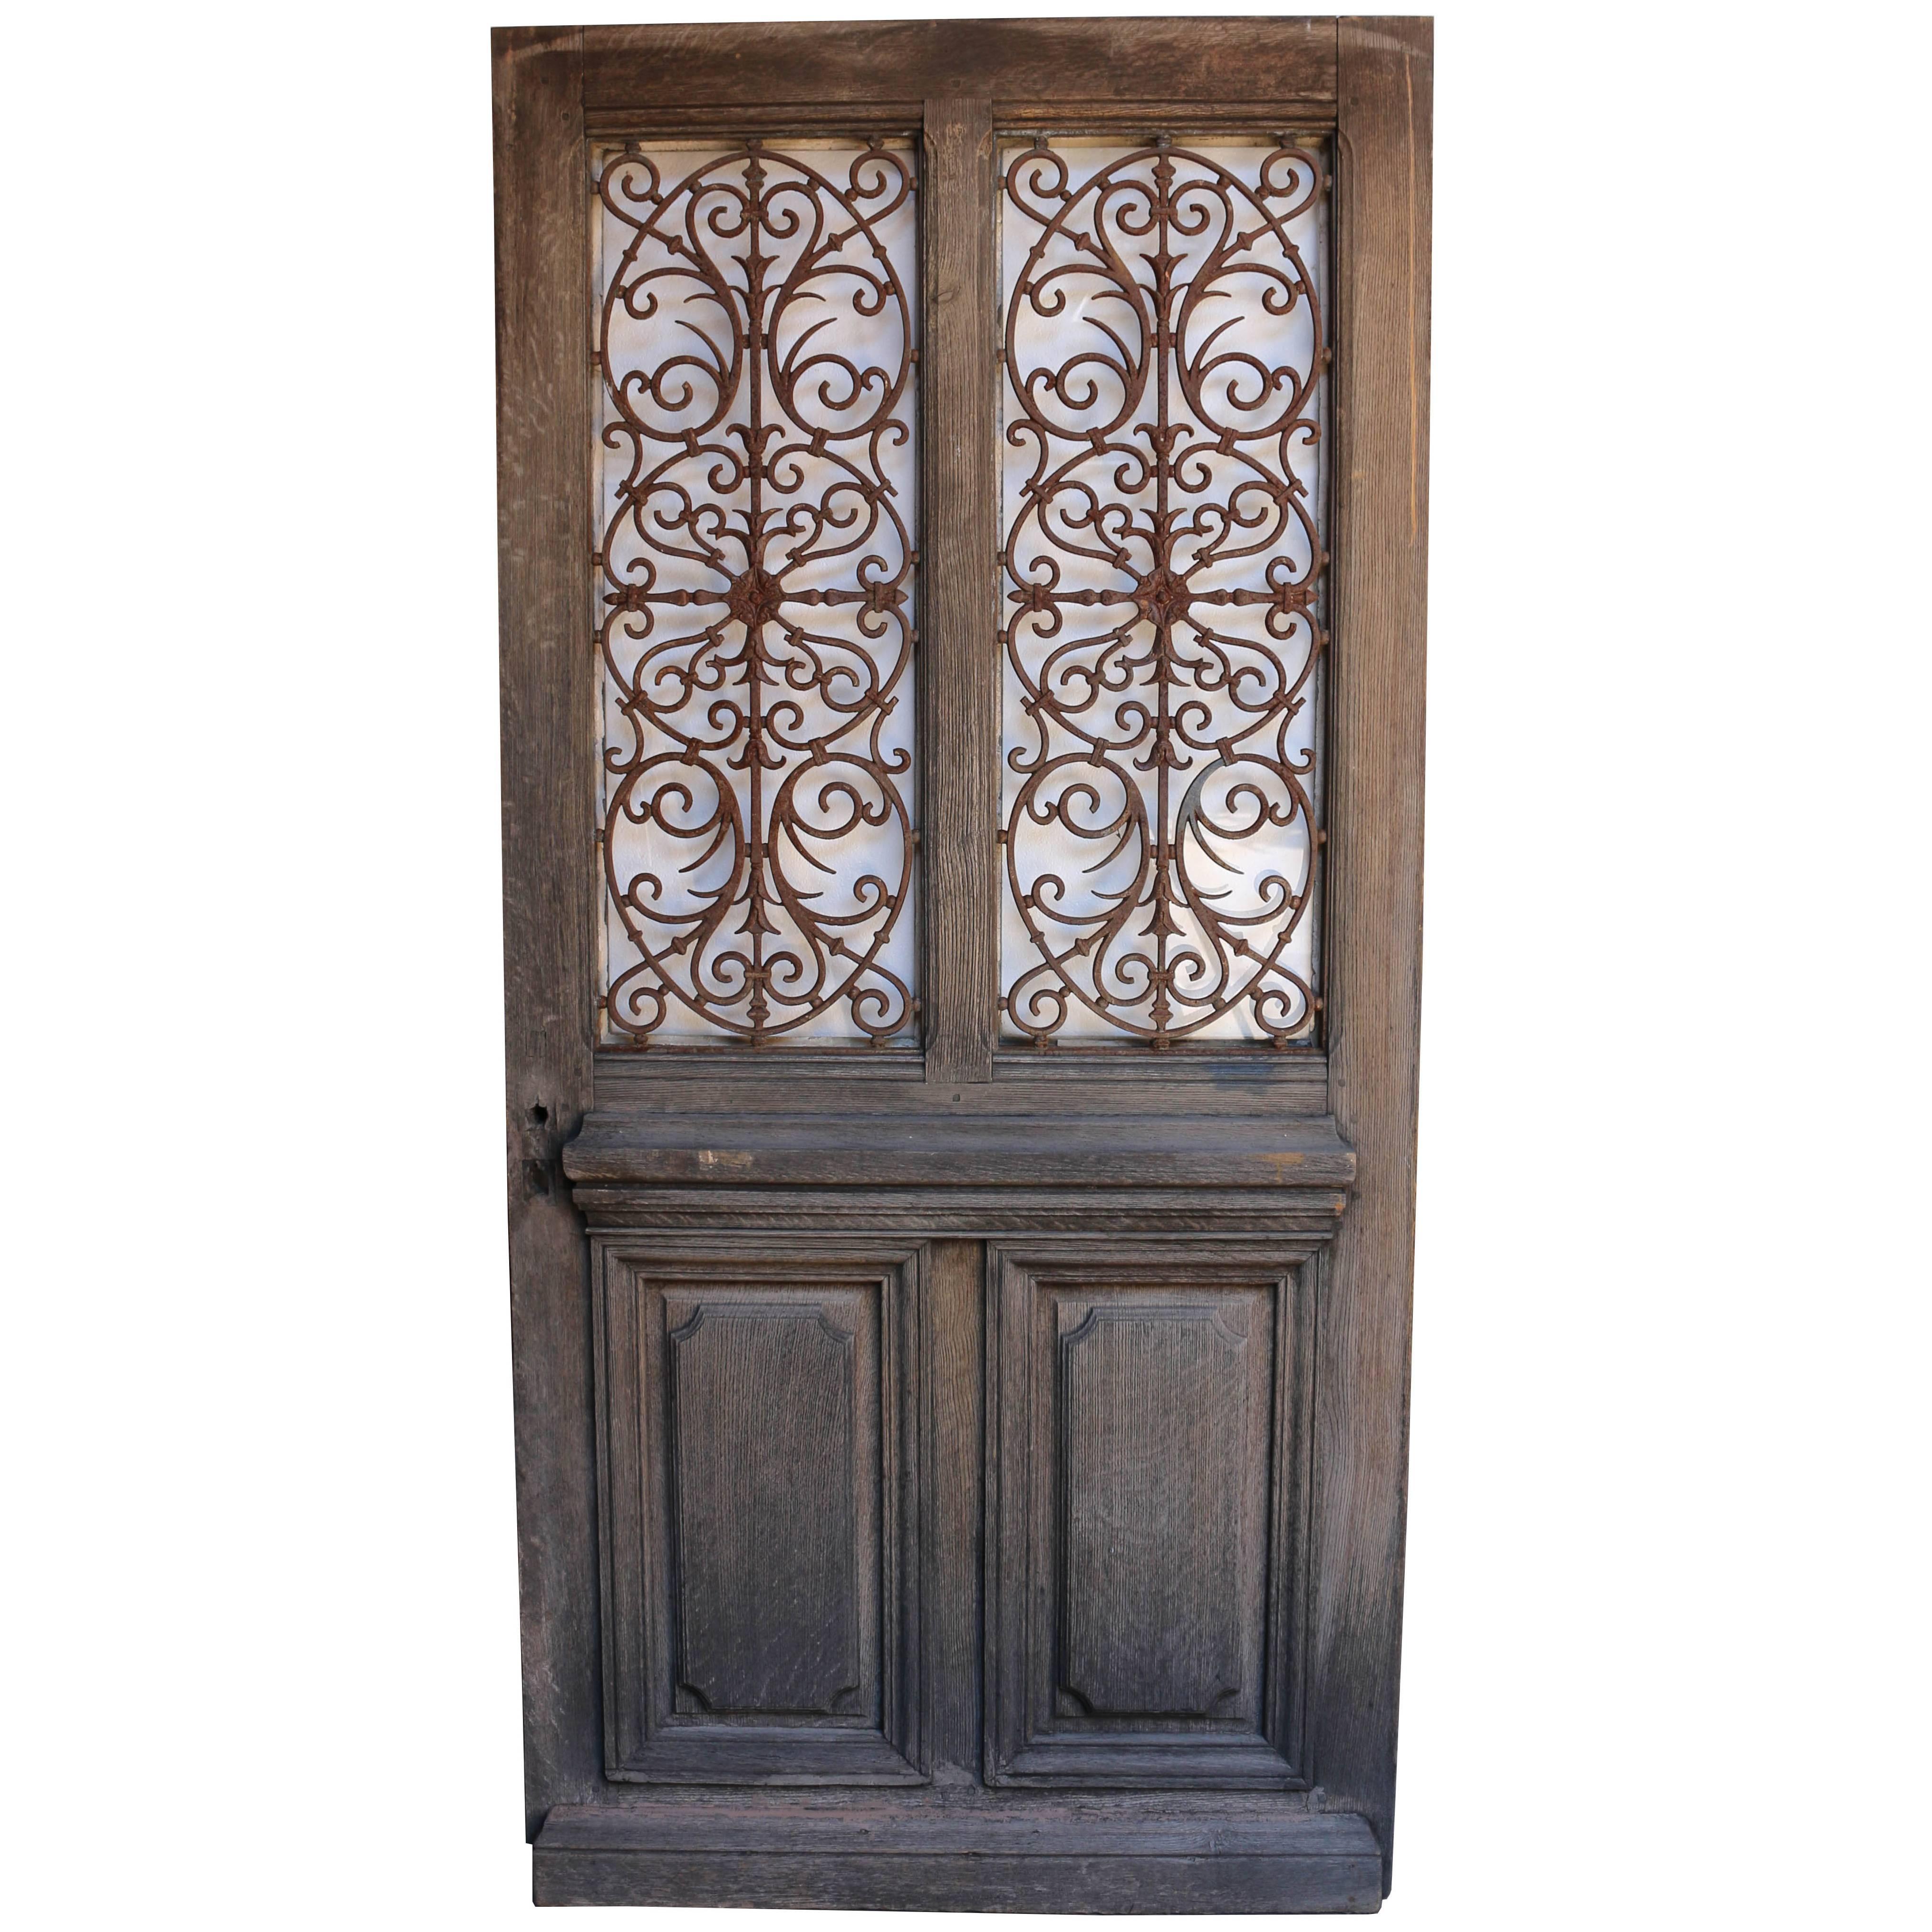 Antique French Oak Front Door with Cast Iron Grills